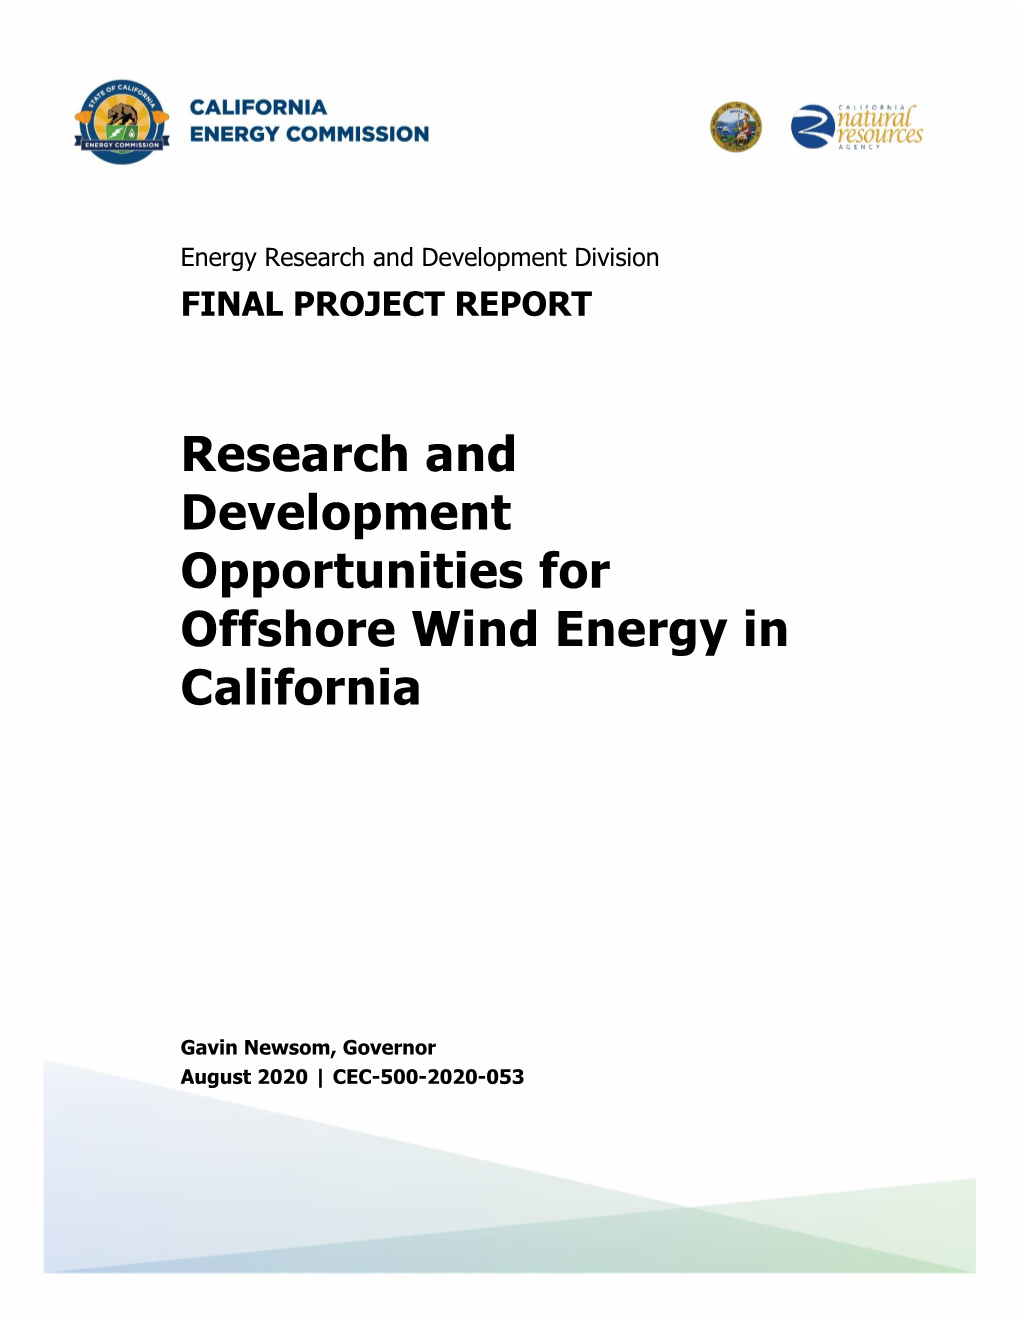 Research and Development Opportunities for Offshore Wind Energy in California